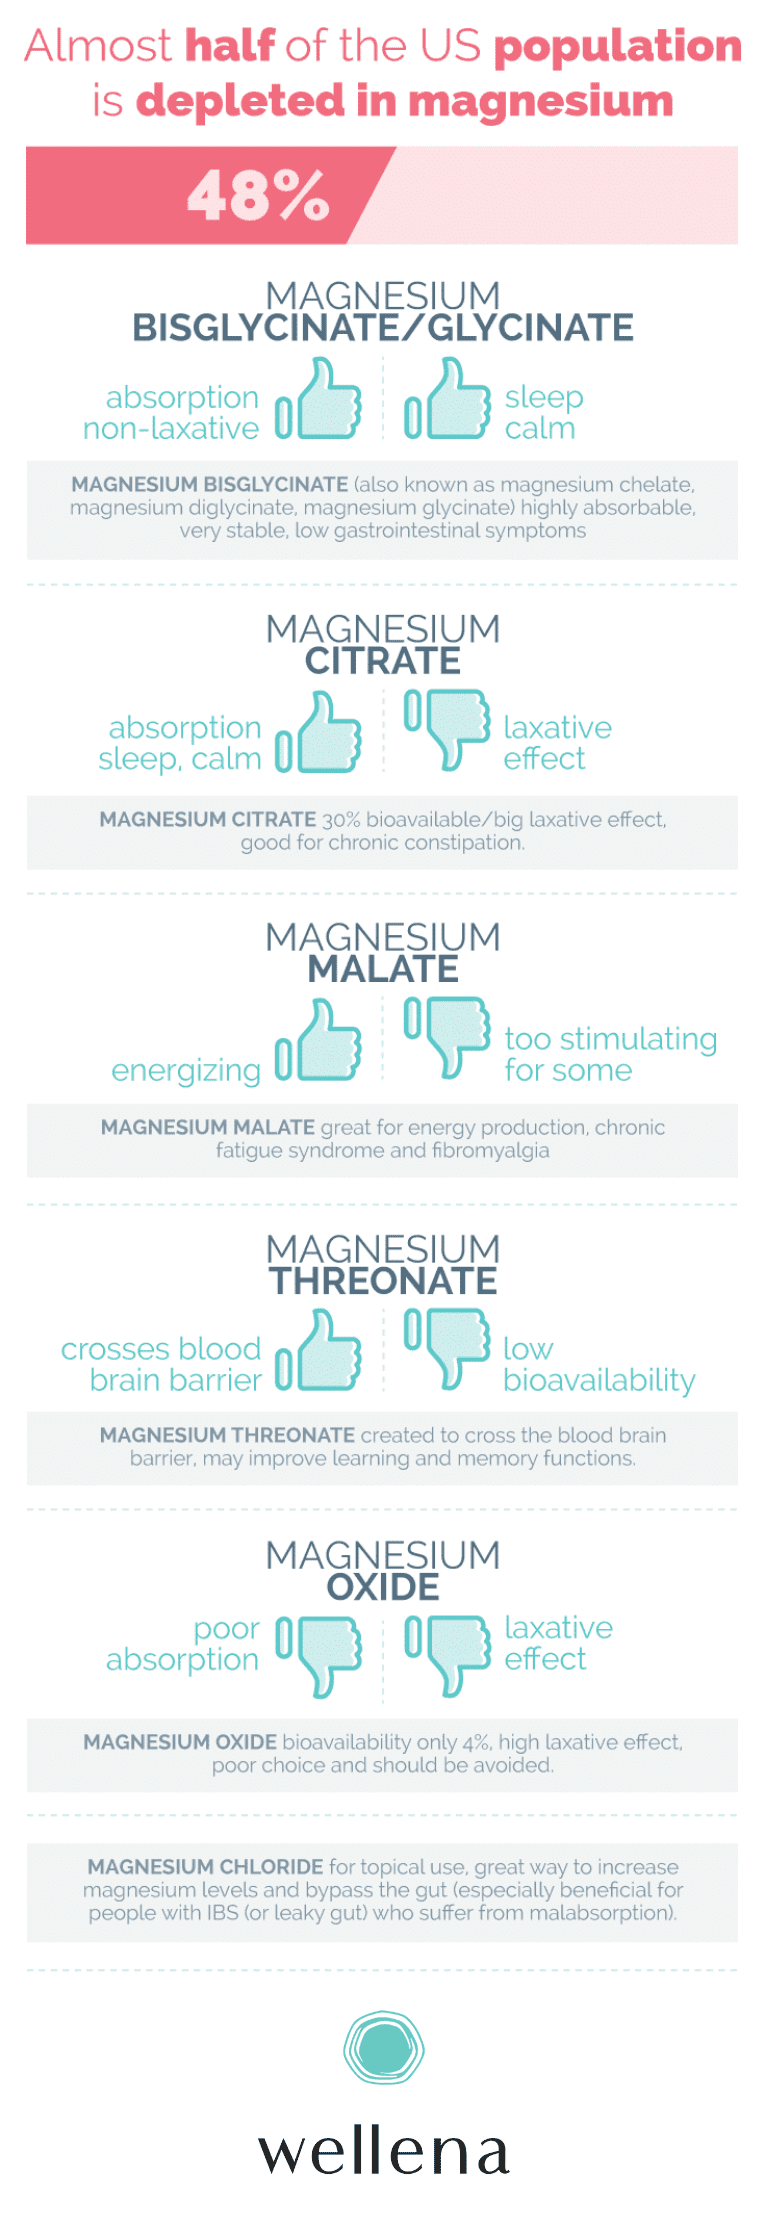 A break down some of the most popular types of magnesium and their benefits. I will also talk about the types of magnesium I do not recommend and why.